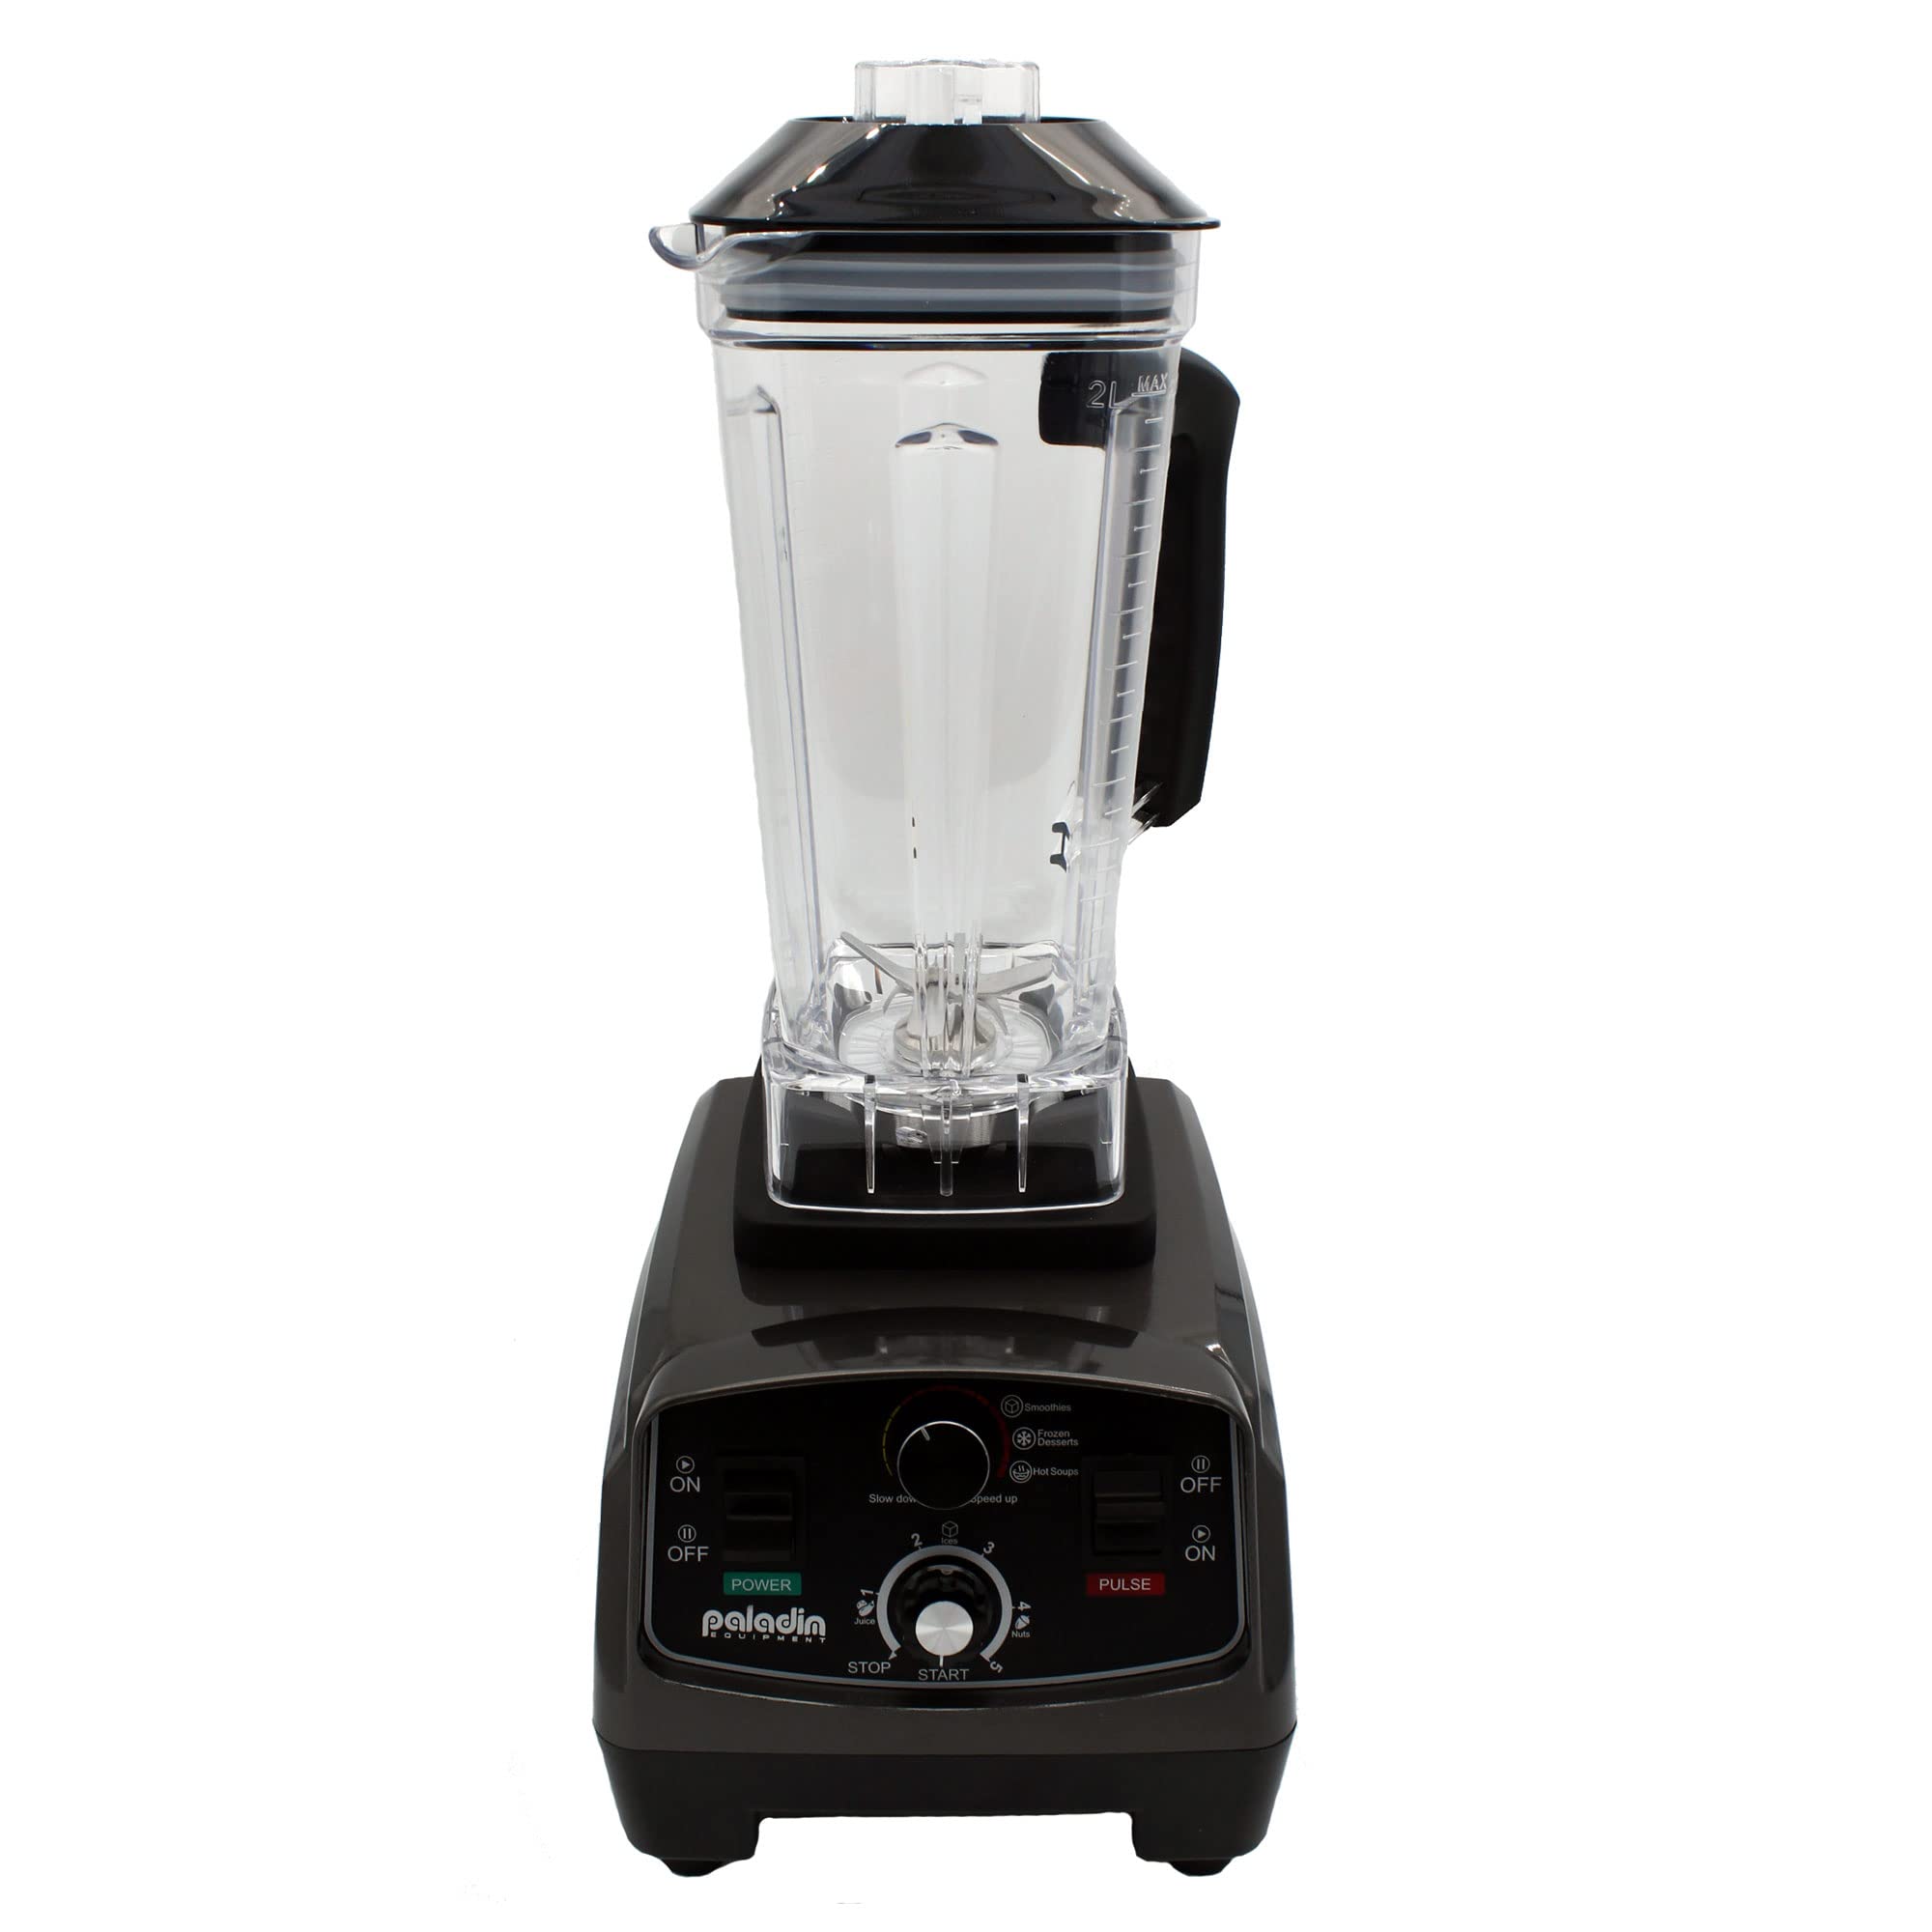 Paladin Equipment Commercial/Professional Blender for Smoothies, Soups, Shakes and More with 2,000mL (68oz) BPA-Free Jar and 1,600W Motor, Black